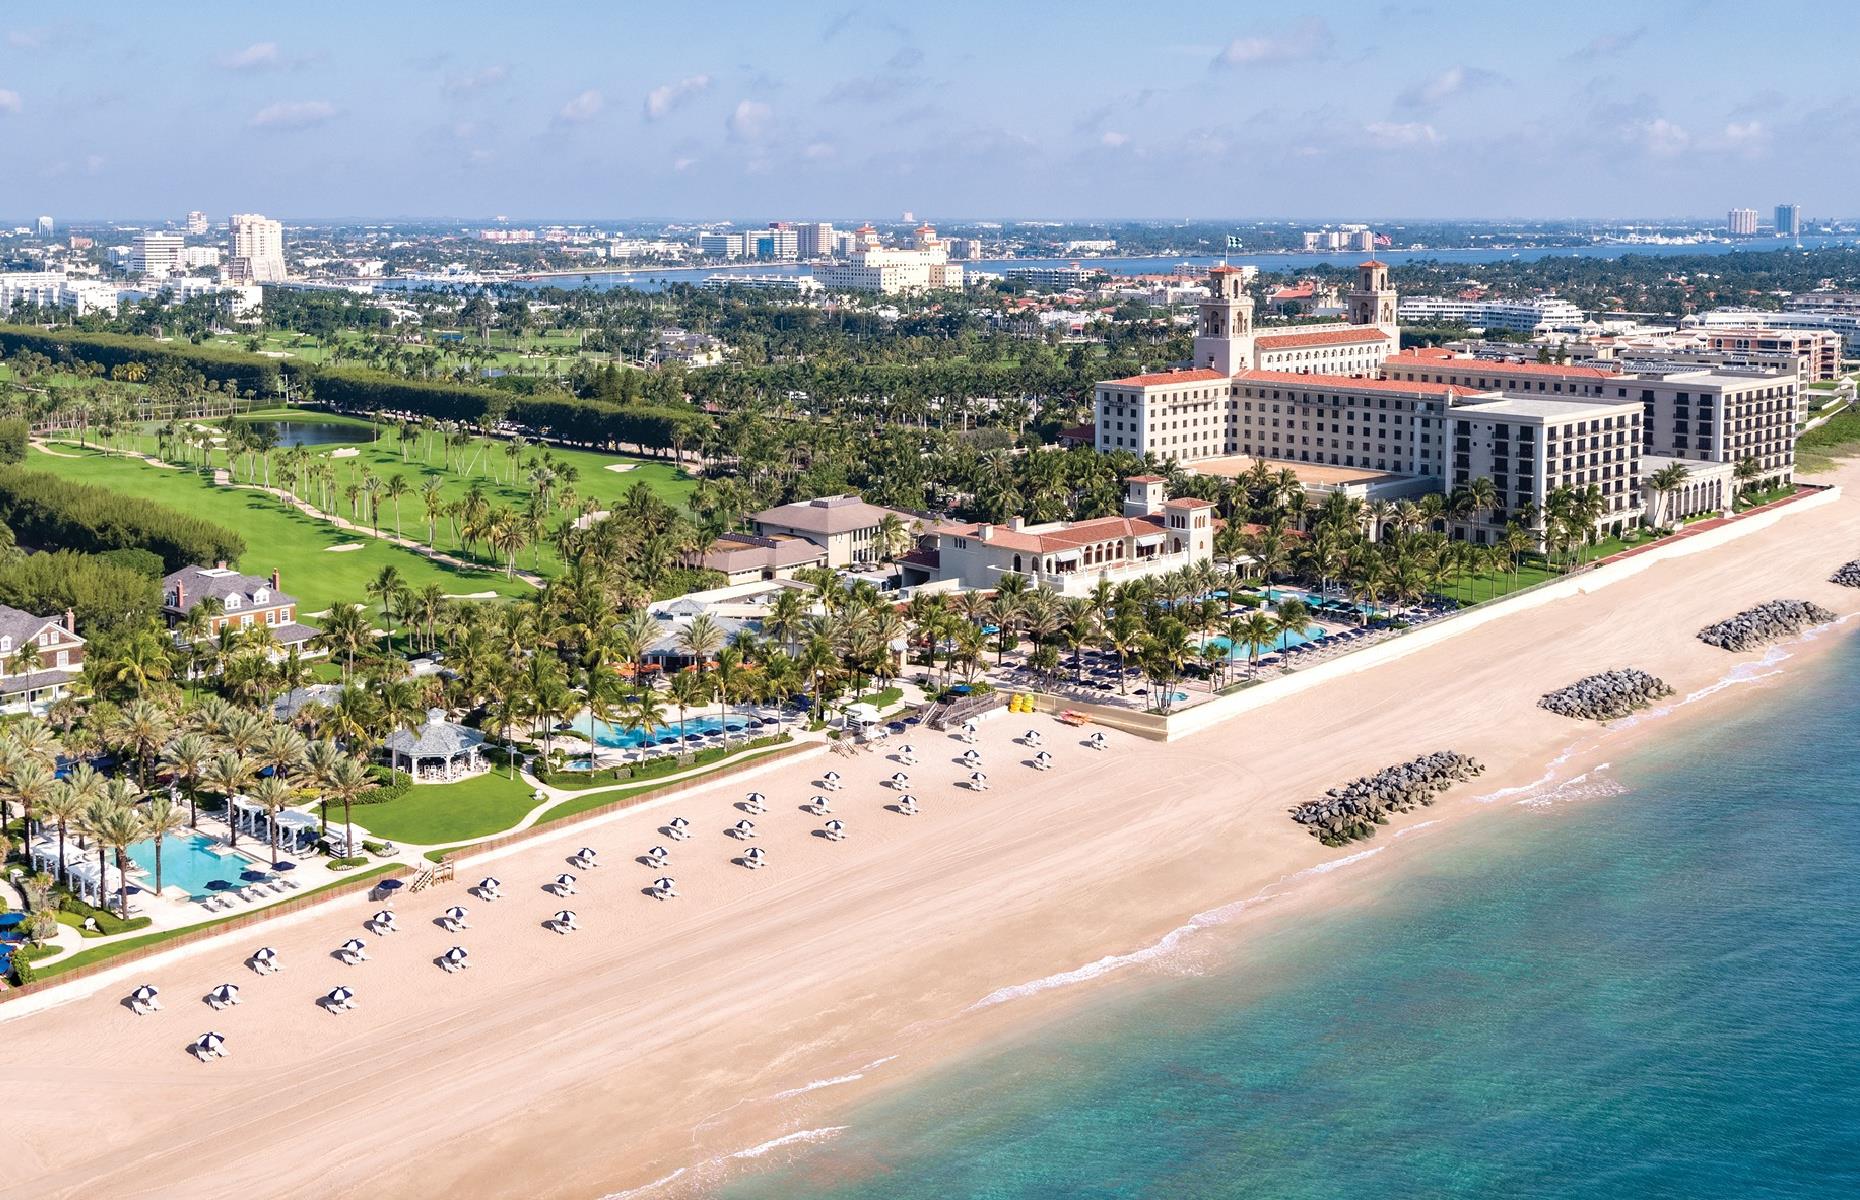 <p>One of America’s most iconic beach resorts, <a href="https://www.thebreakers.com">The Breakers</a> has been a Palm Beach institution since 1896. The hotel still holds that sense of old-school Palm Beach luxury, but is, of course, fully modernized and has even implemented several eco-friendly initiatives throughout the expansive property. Resort activities (beyond the close proximity to one of America’s best beaches) include multiple pools, a golf course and tennis courts, as well as 10 bars and restaurants.</p>  <p><strong><a href="https://www.loveexploring.com/galleries/109043/ranked-floridas-most-beautiful-small-towns-and-cities">Check out Florida's best small towns and cities</a></strong></p>